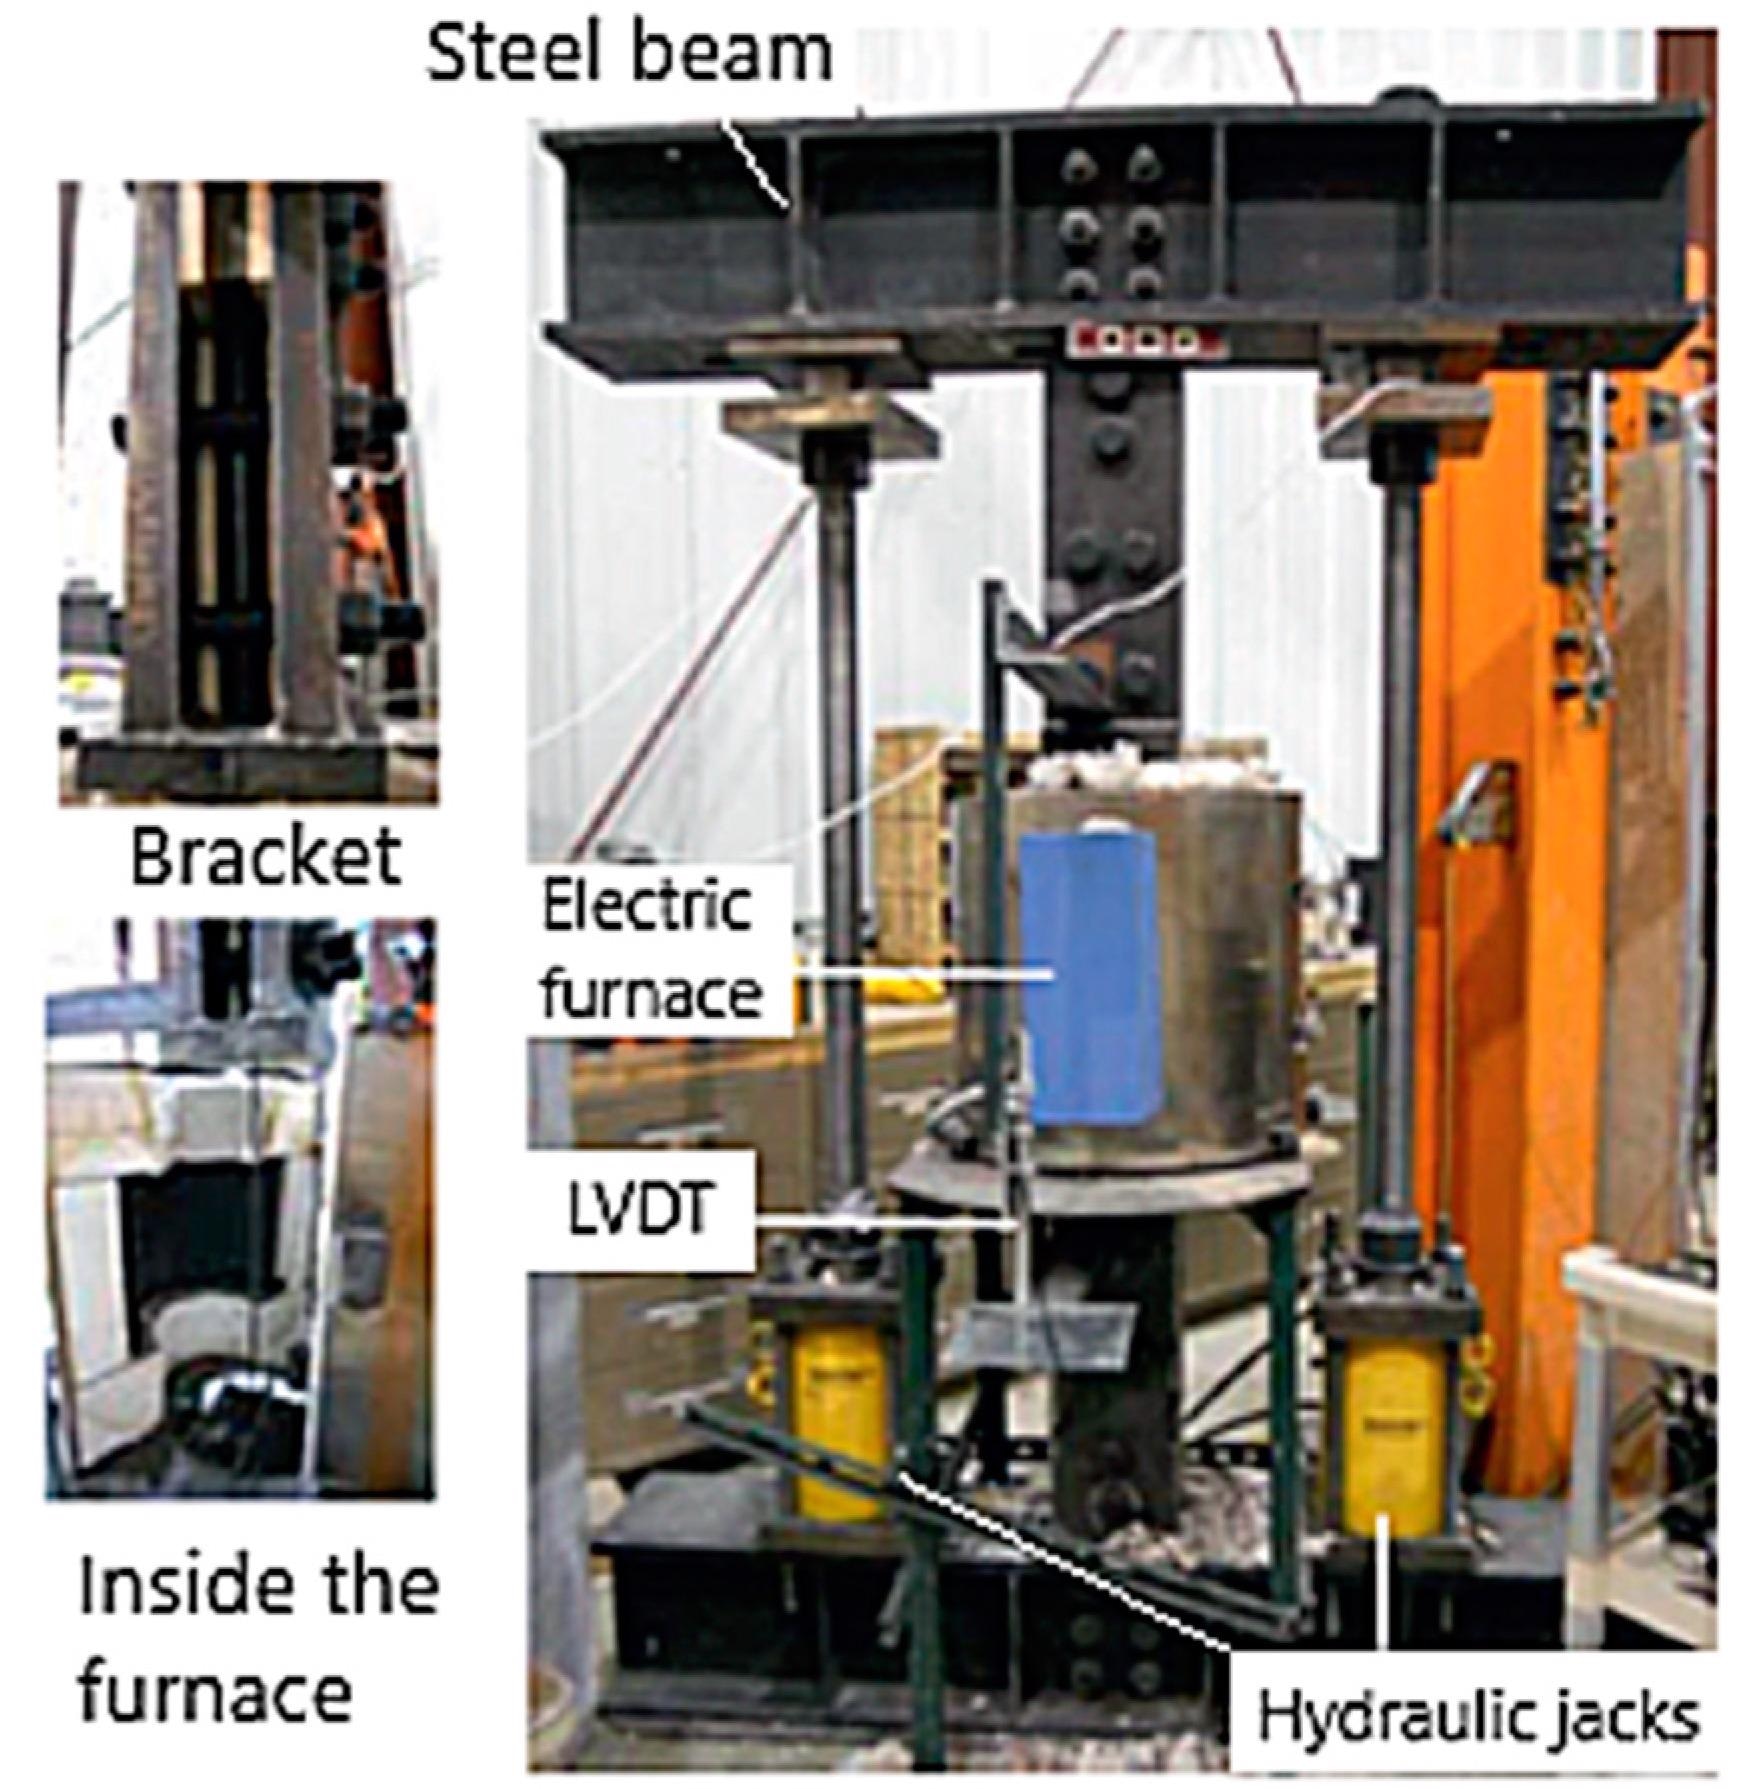 Test setup for FRP composite strength test at elevated temperatures.